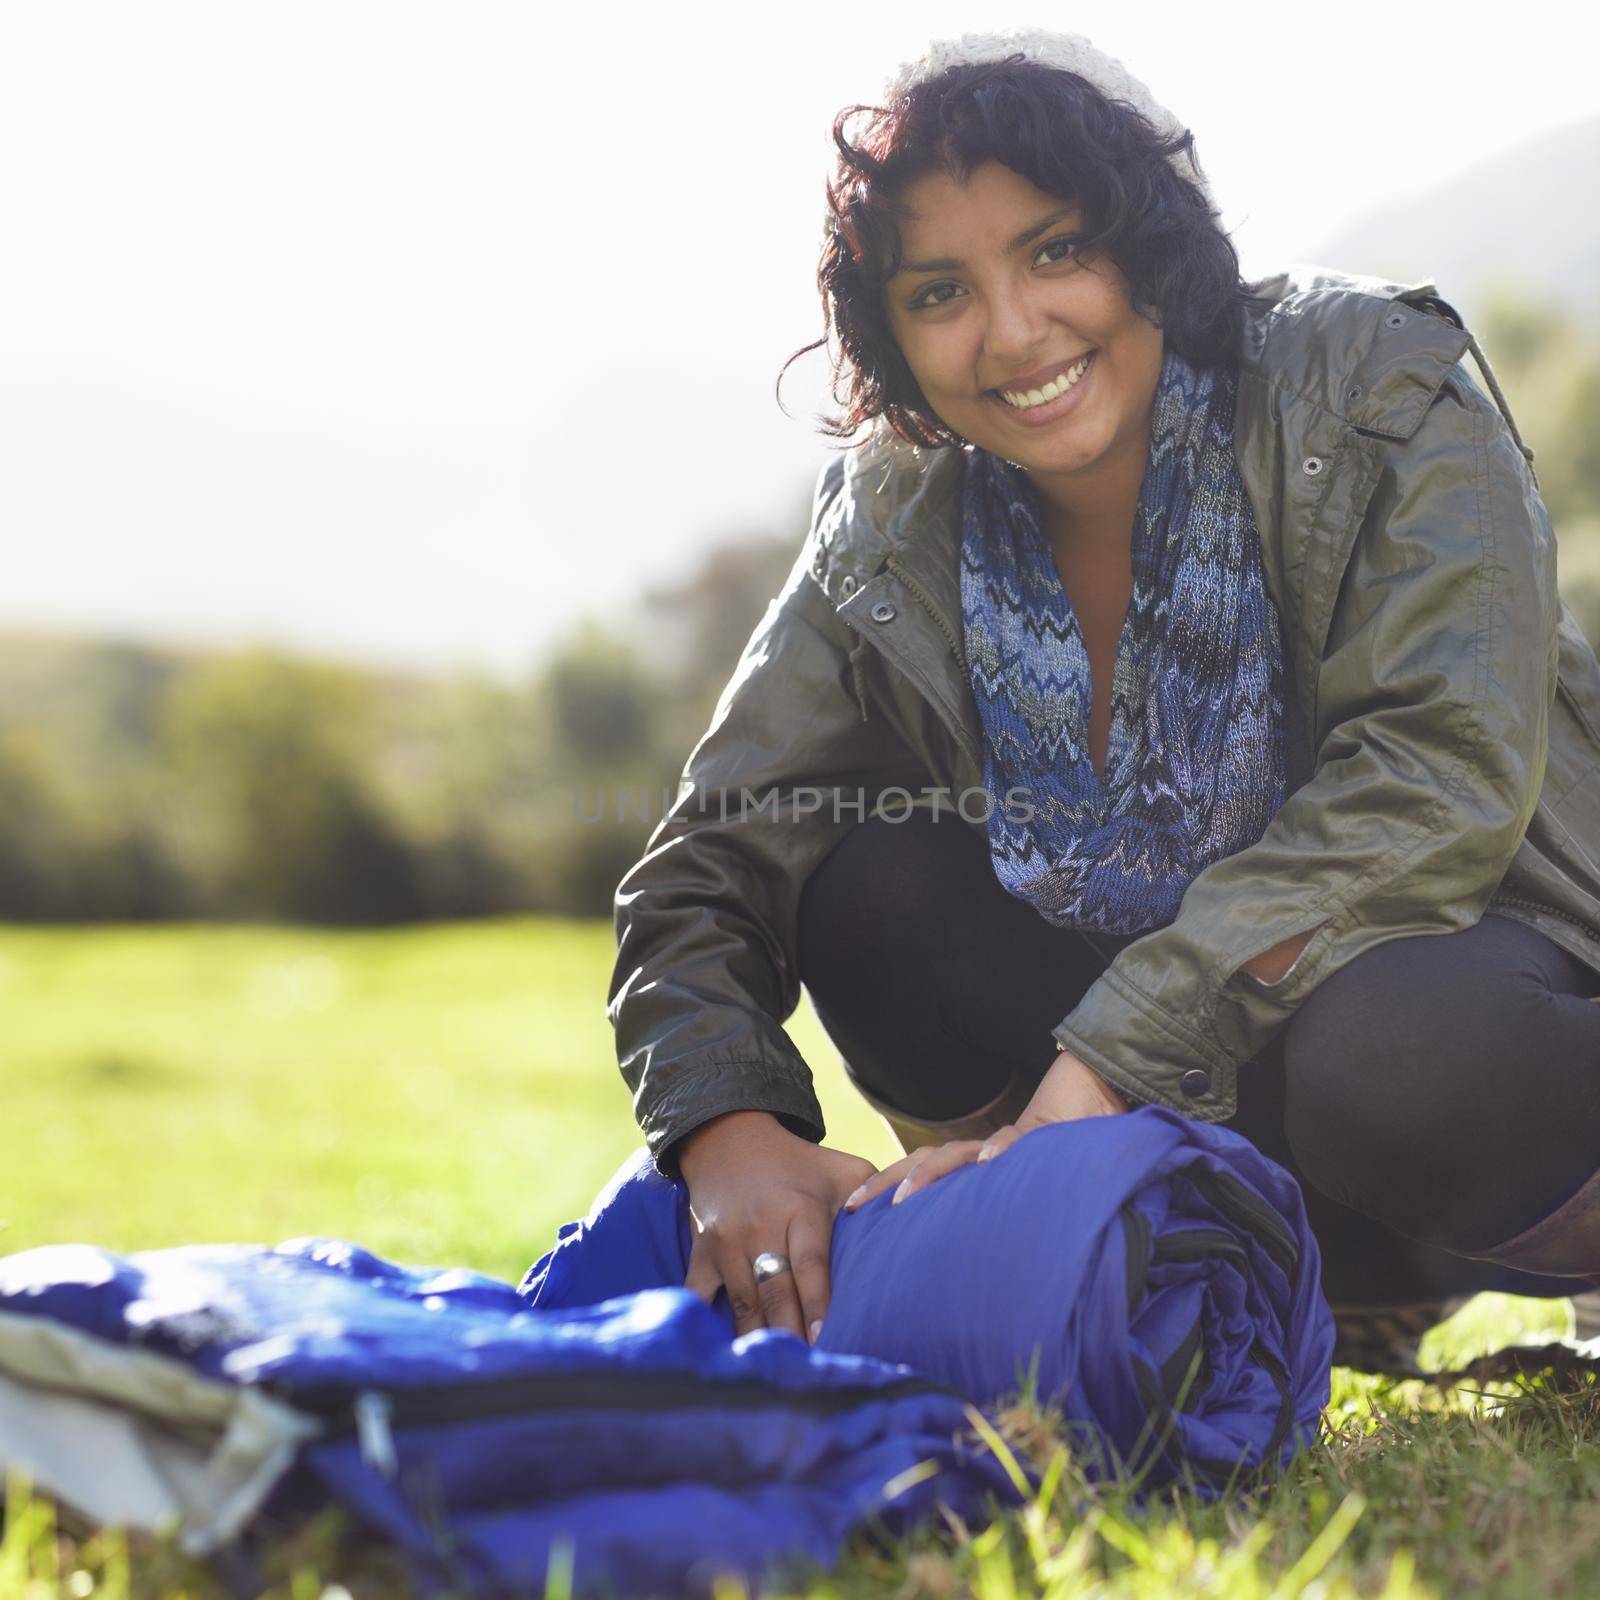 Attractive young woman unrolling a sleeping bag on the grass.